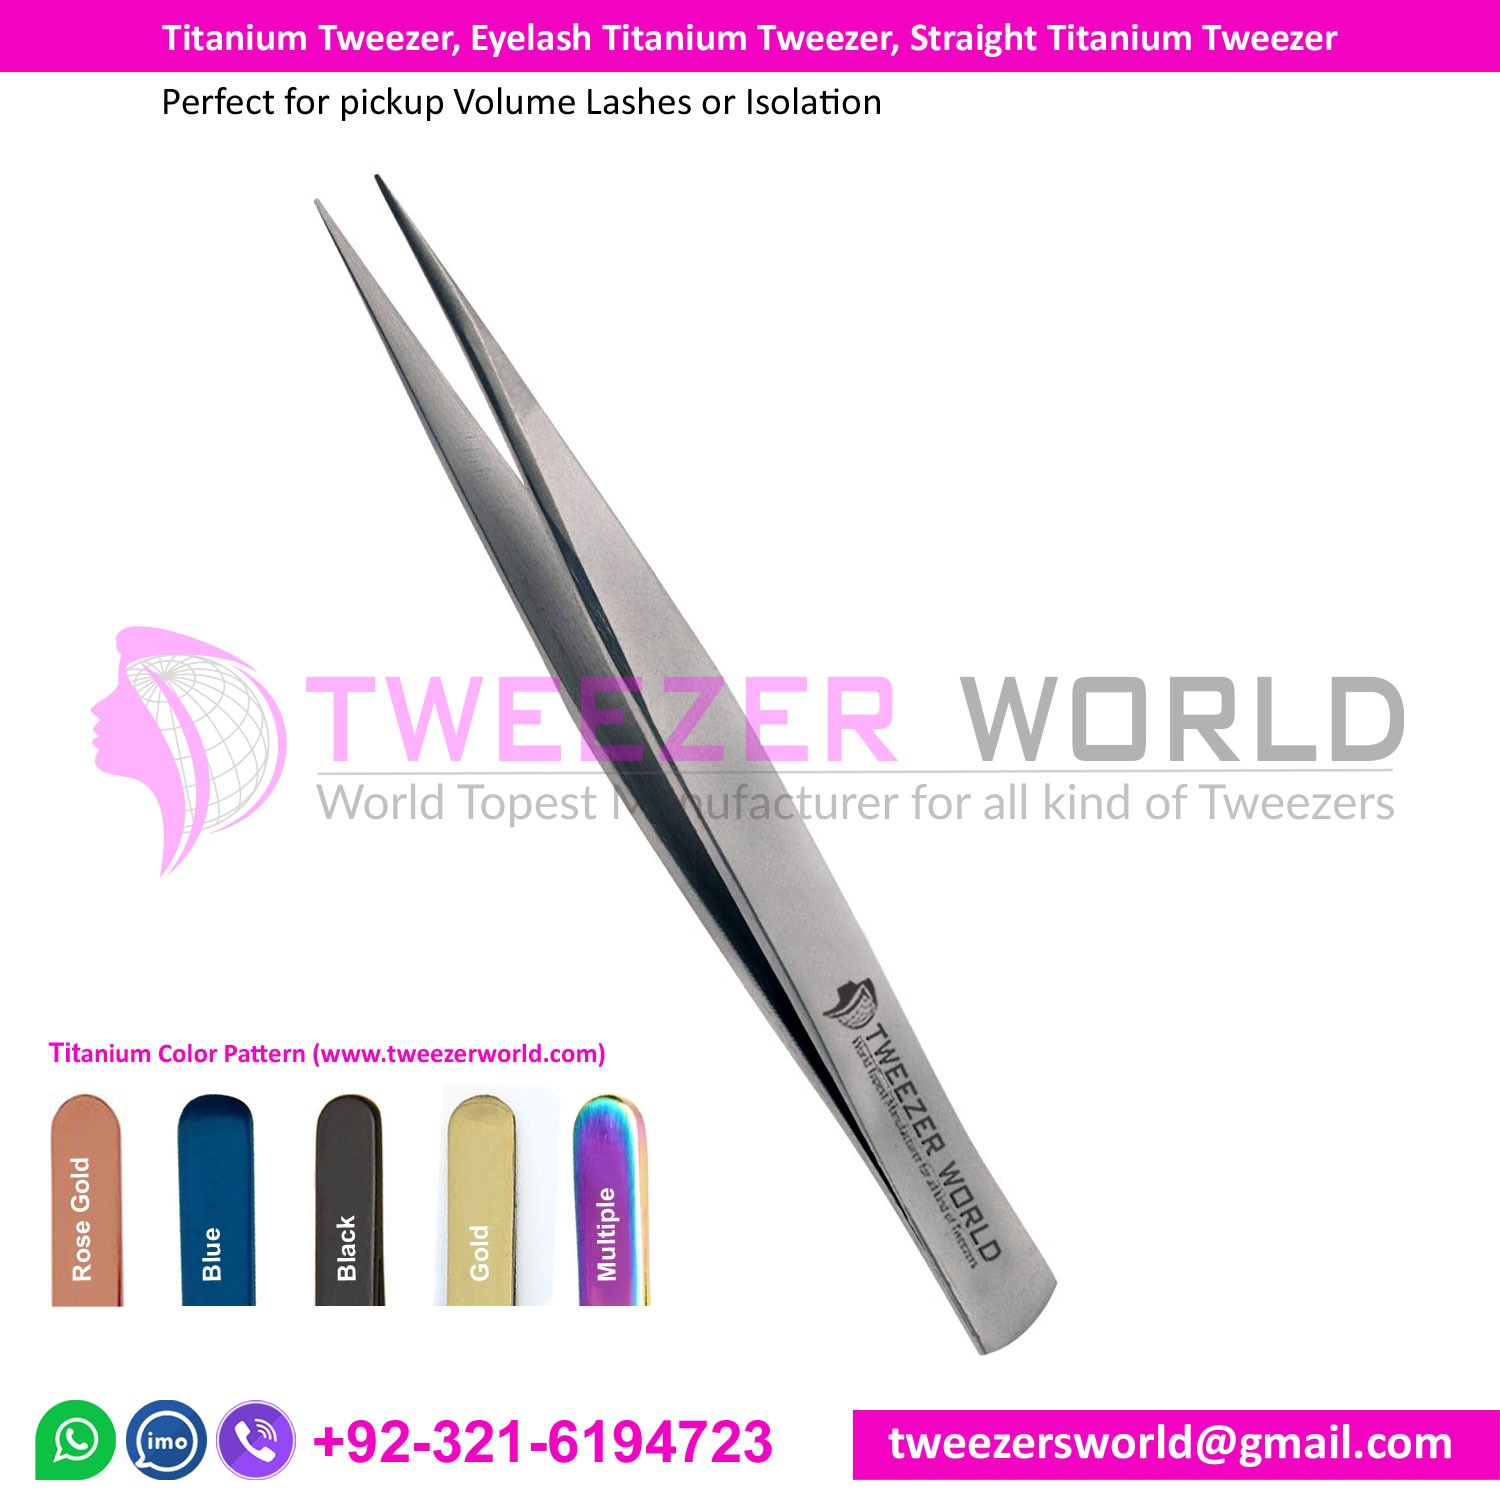 2 tweezers made of high quality stainless steel for eyelash extensions Best tweezers set